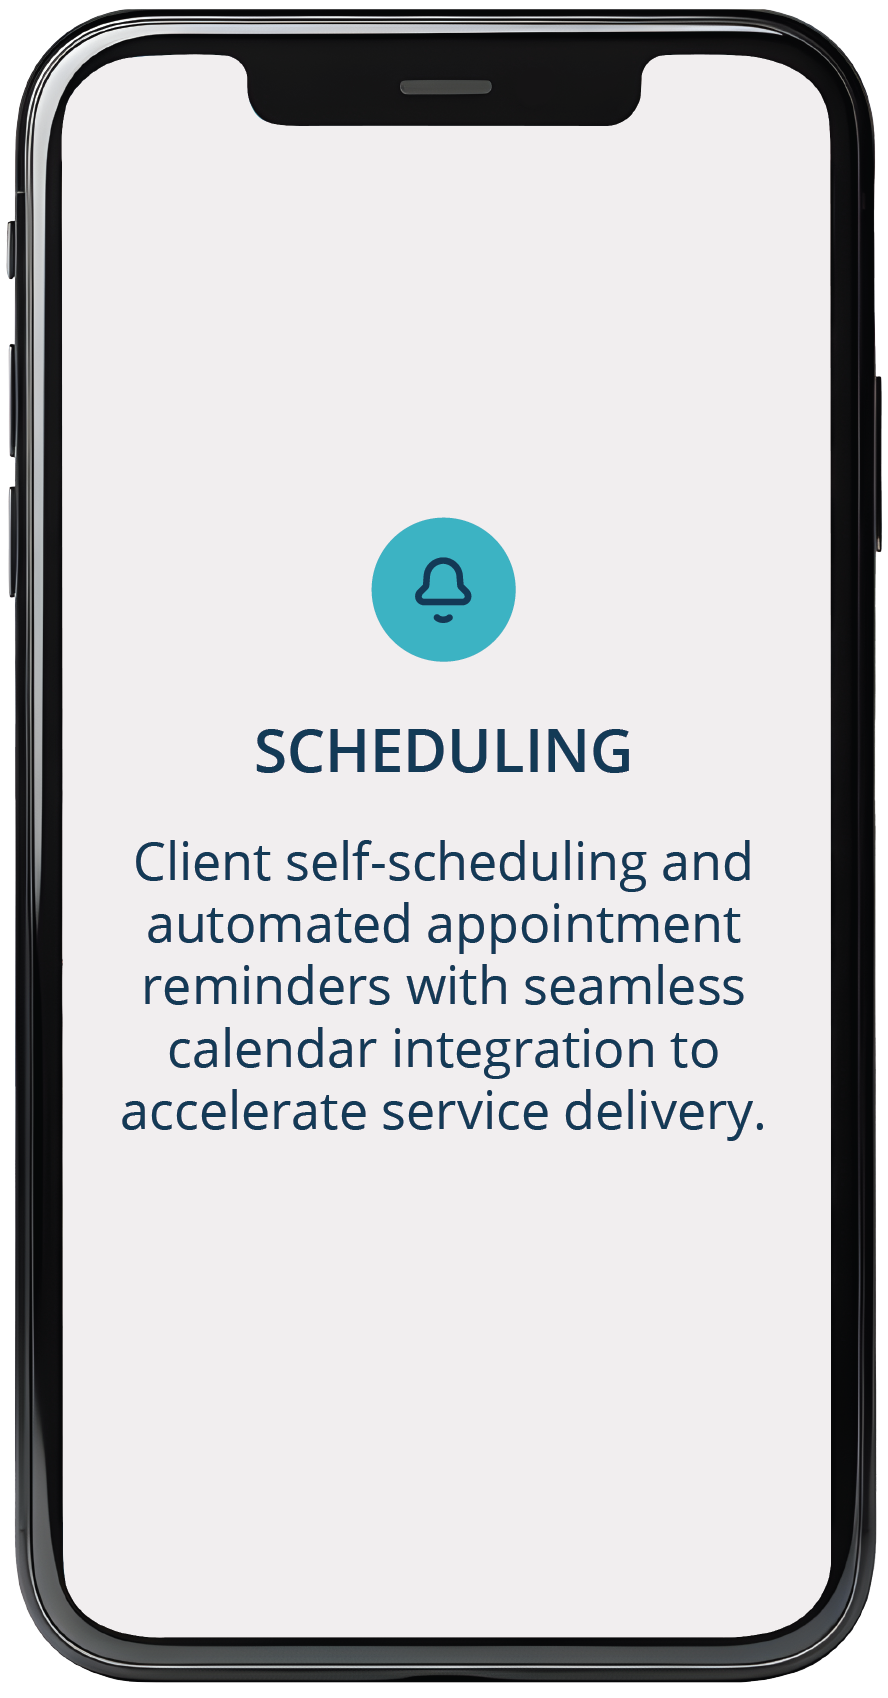 Client self-scheduling and automated appointment reminders with seamless calendar integration to accelerate service delivery. 